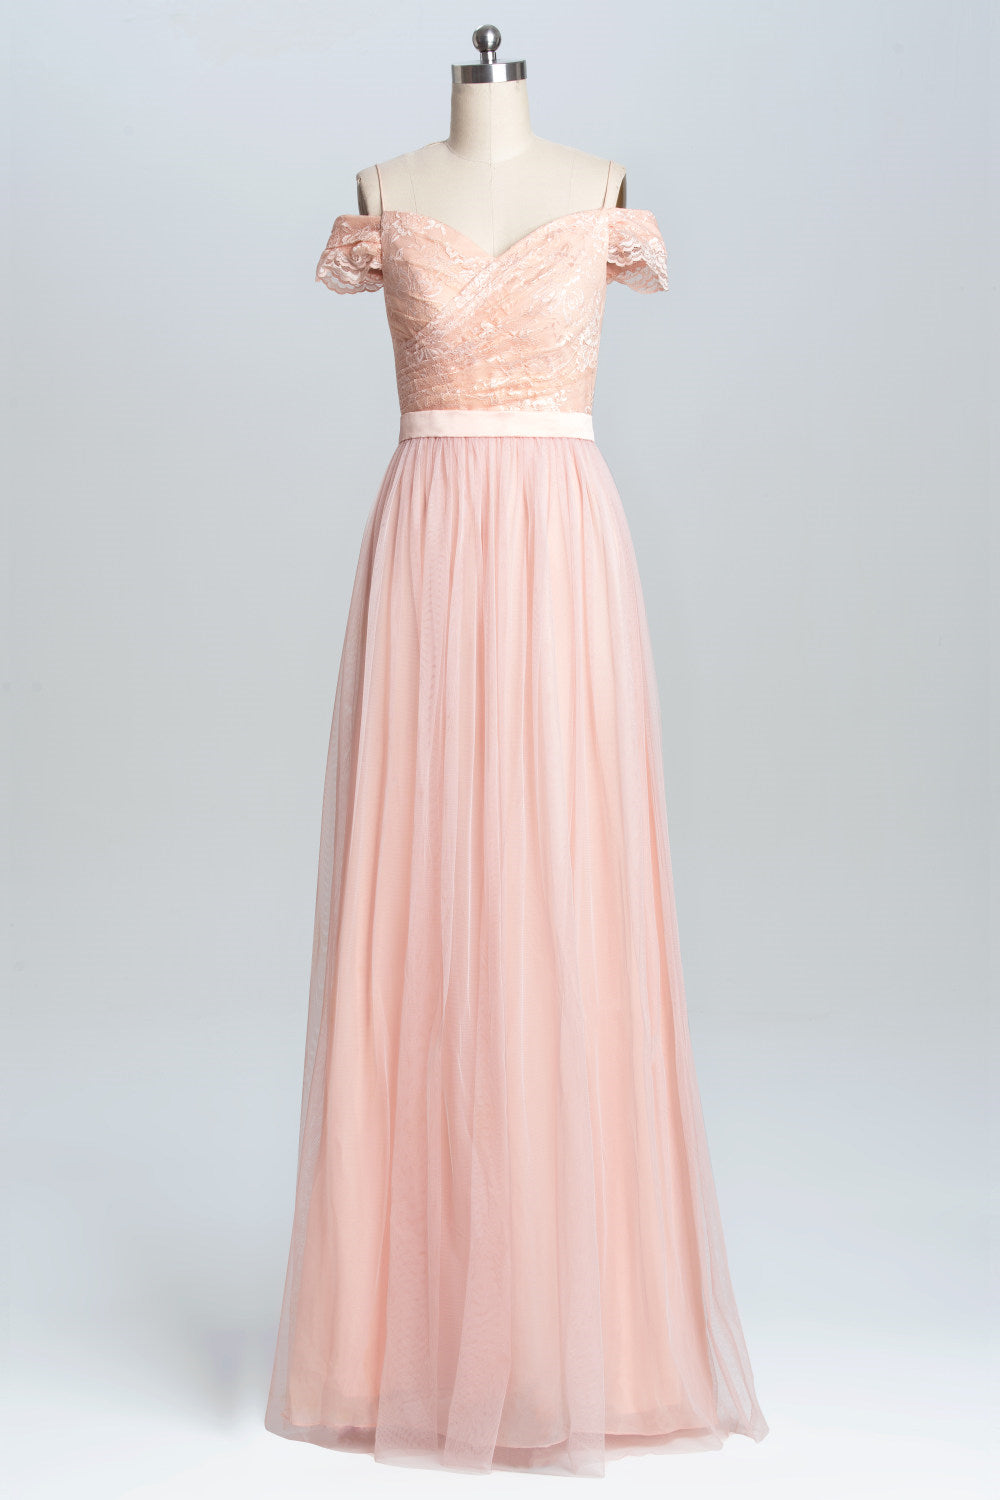 Off the Shoulder Pink Lace and Tulle Long Corset Bridesmaid Dress outfit, Prom Dress Ballgown